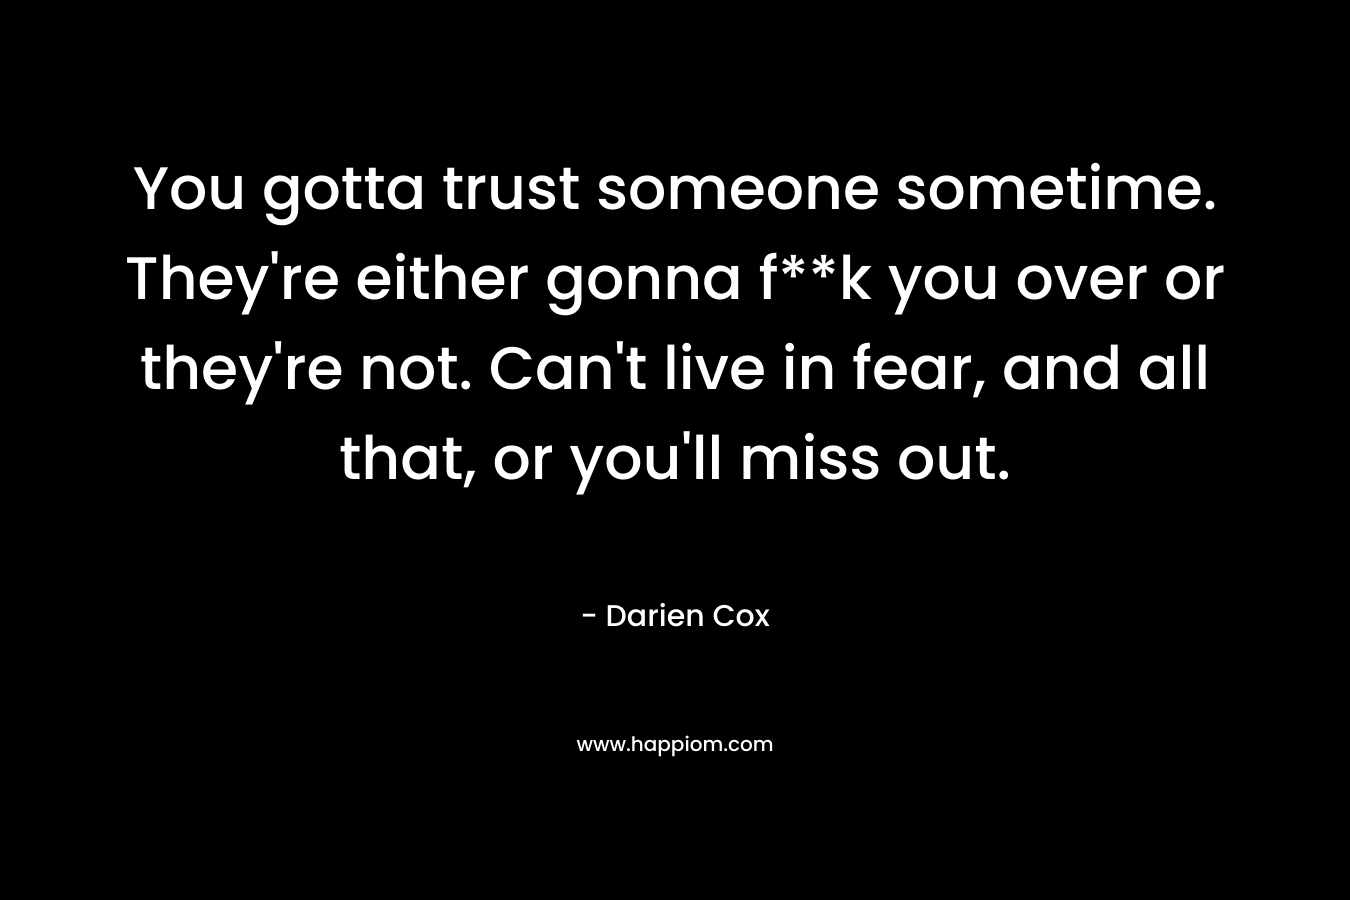 You gotta trust someone sometime. They’re either gonna f**k you over or they’re not. Can’t live in fear, and all that, or you’ll miss out. – Darien Cox